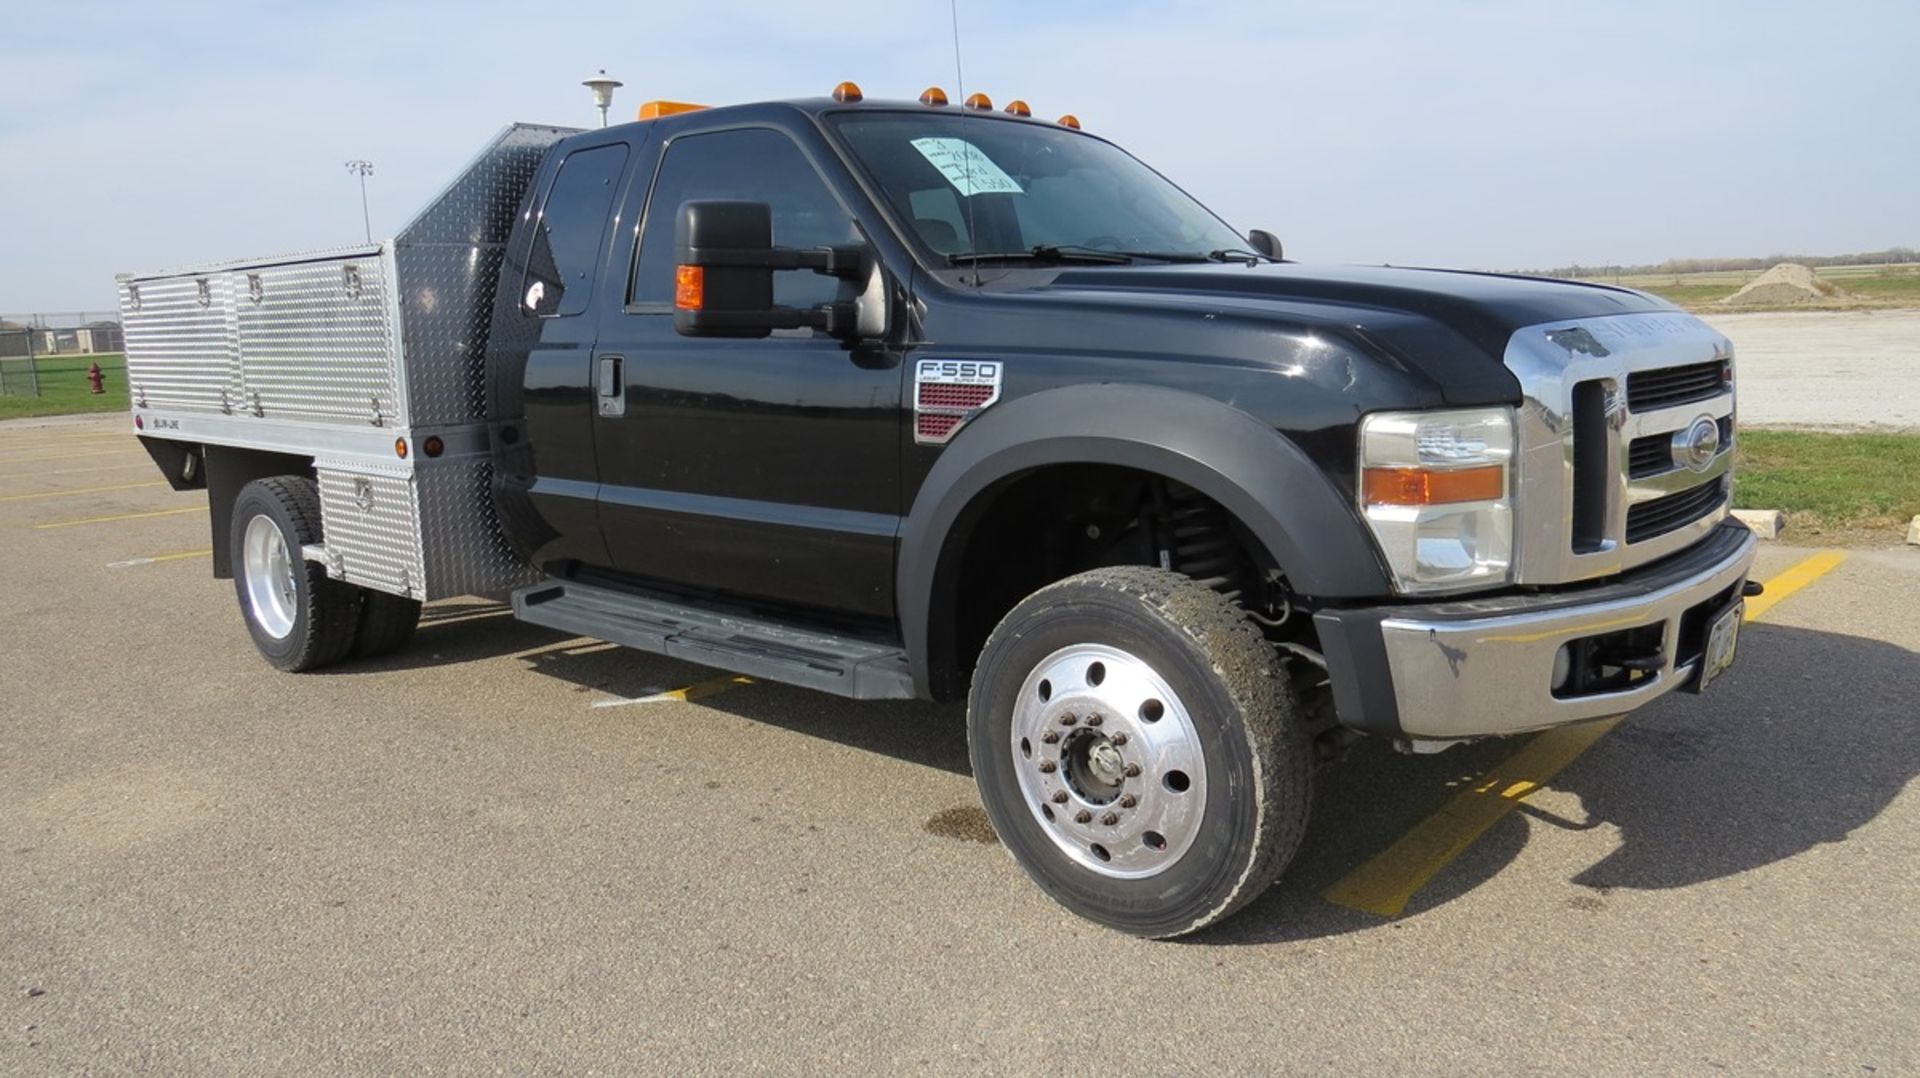 2008 Ford Model F-550 Lariat Extended Cab 4x4 Diesel 1-Ton Dually Pickup, VIN# ED26416, 6.4 Liter - Image 3 of 43